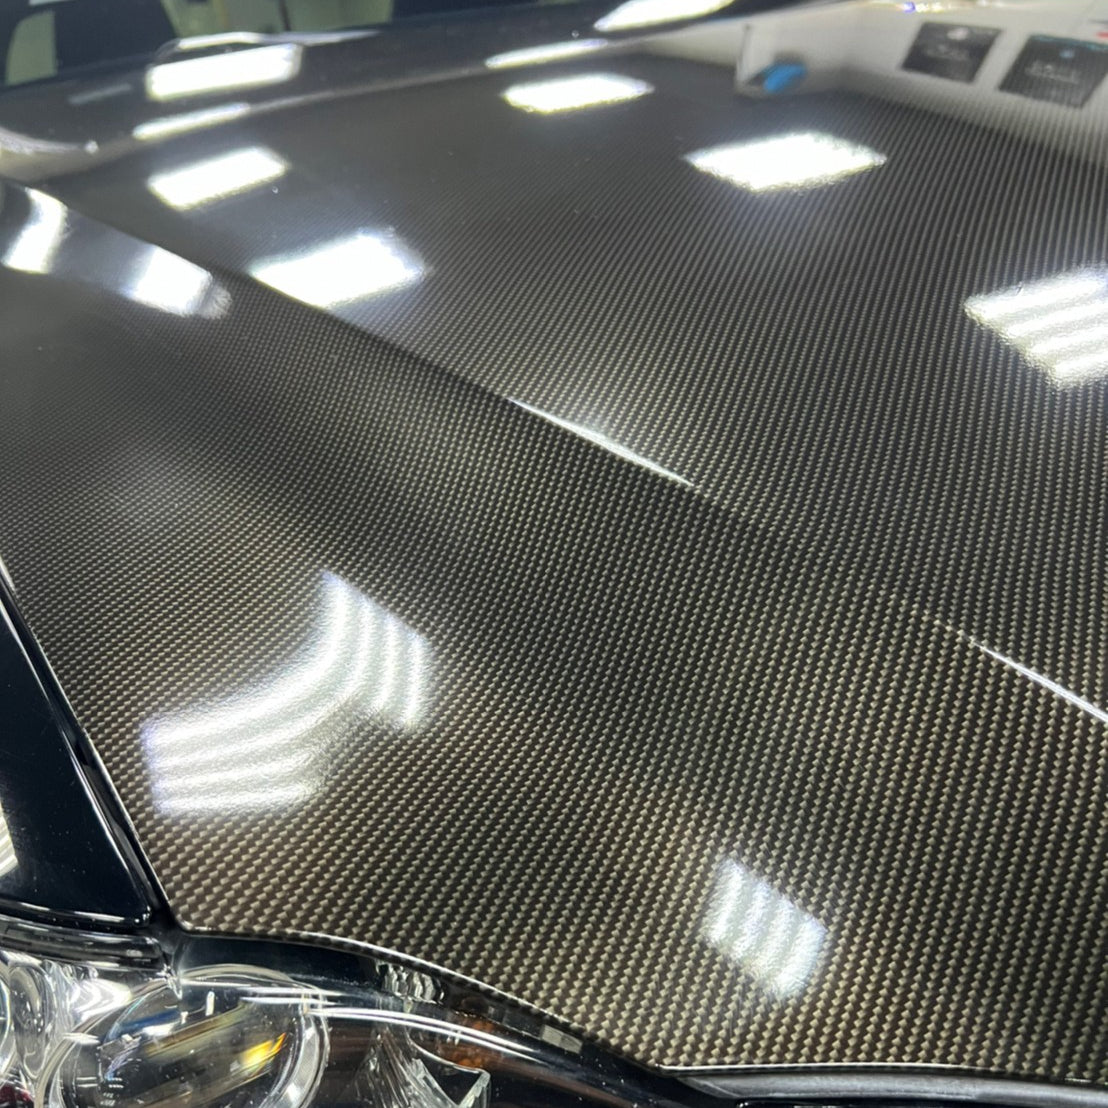 All there is to know about carbon fiber in cars